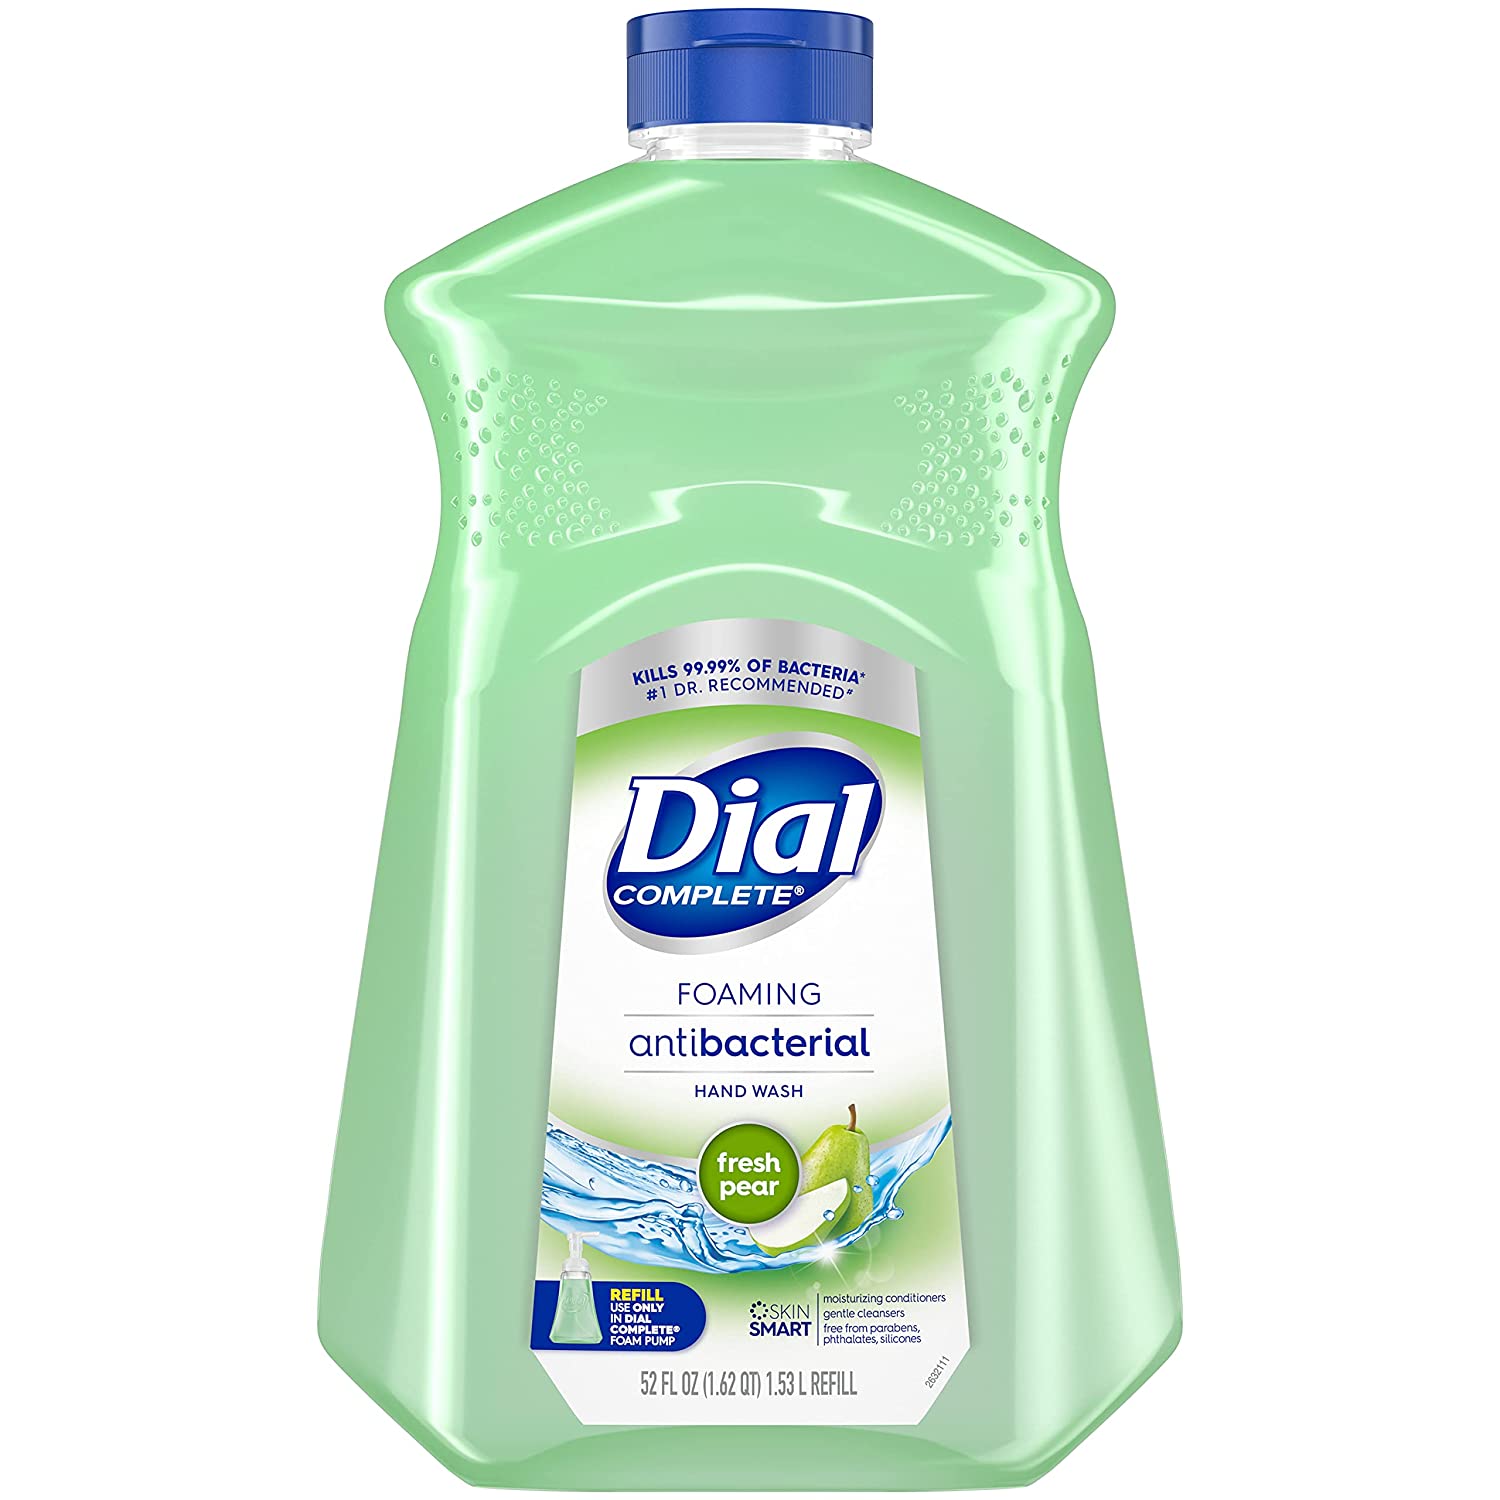 52-Oz Dial Complete Antibacterial Foaming Hand Soap (Fresh Pear) $4.45 + Free Shipping w/ Prime or on $25+